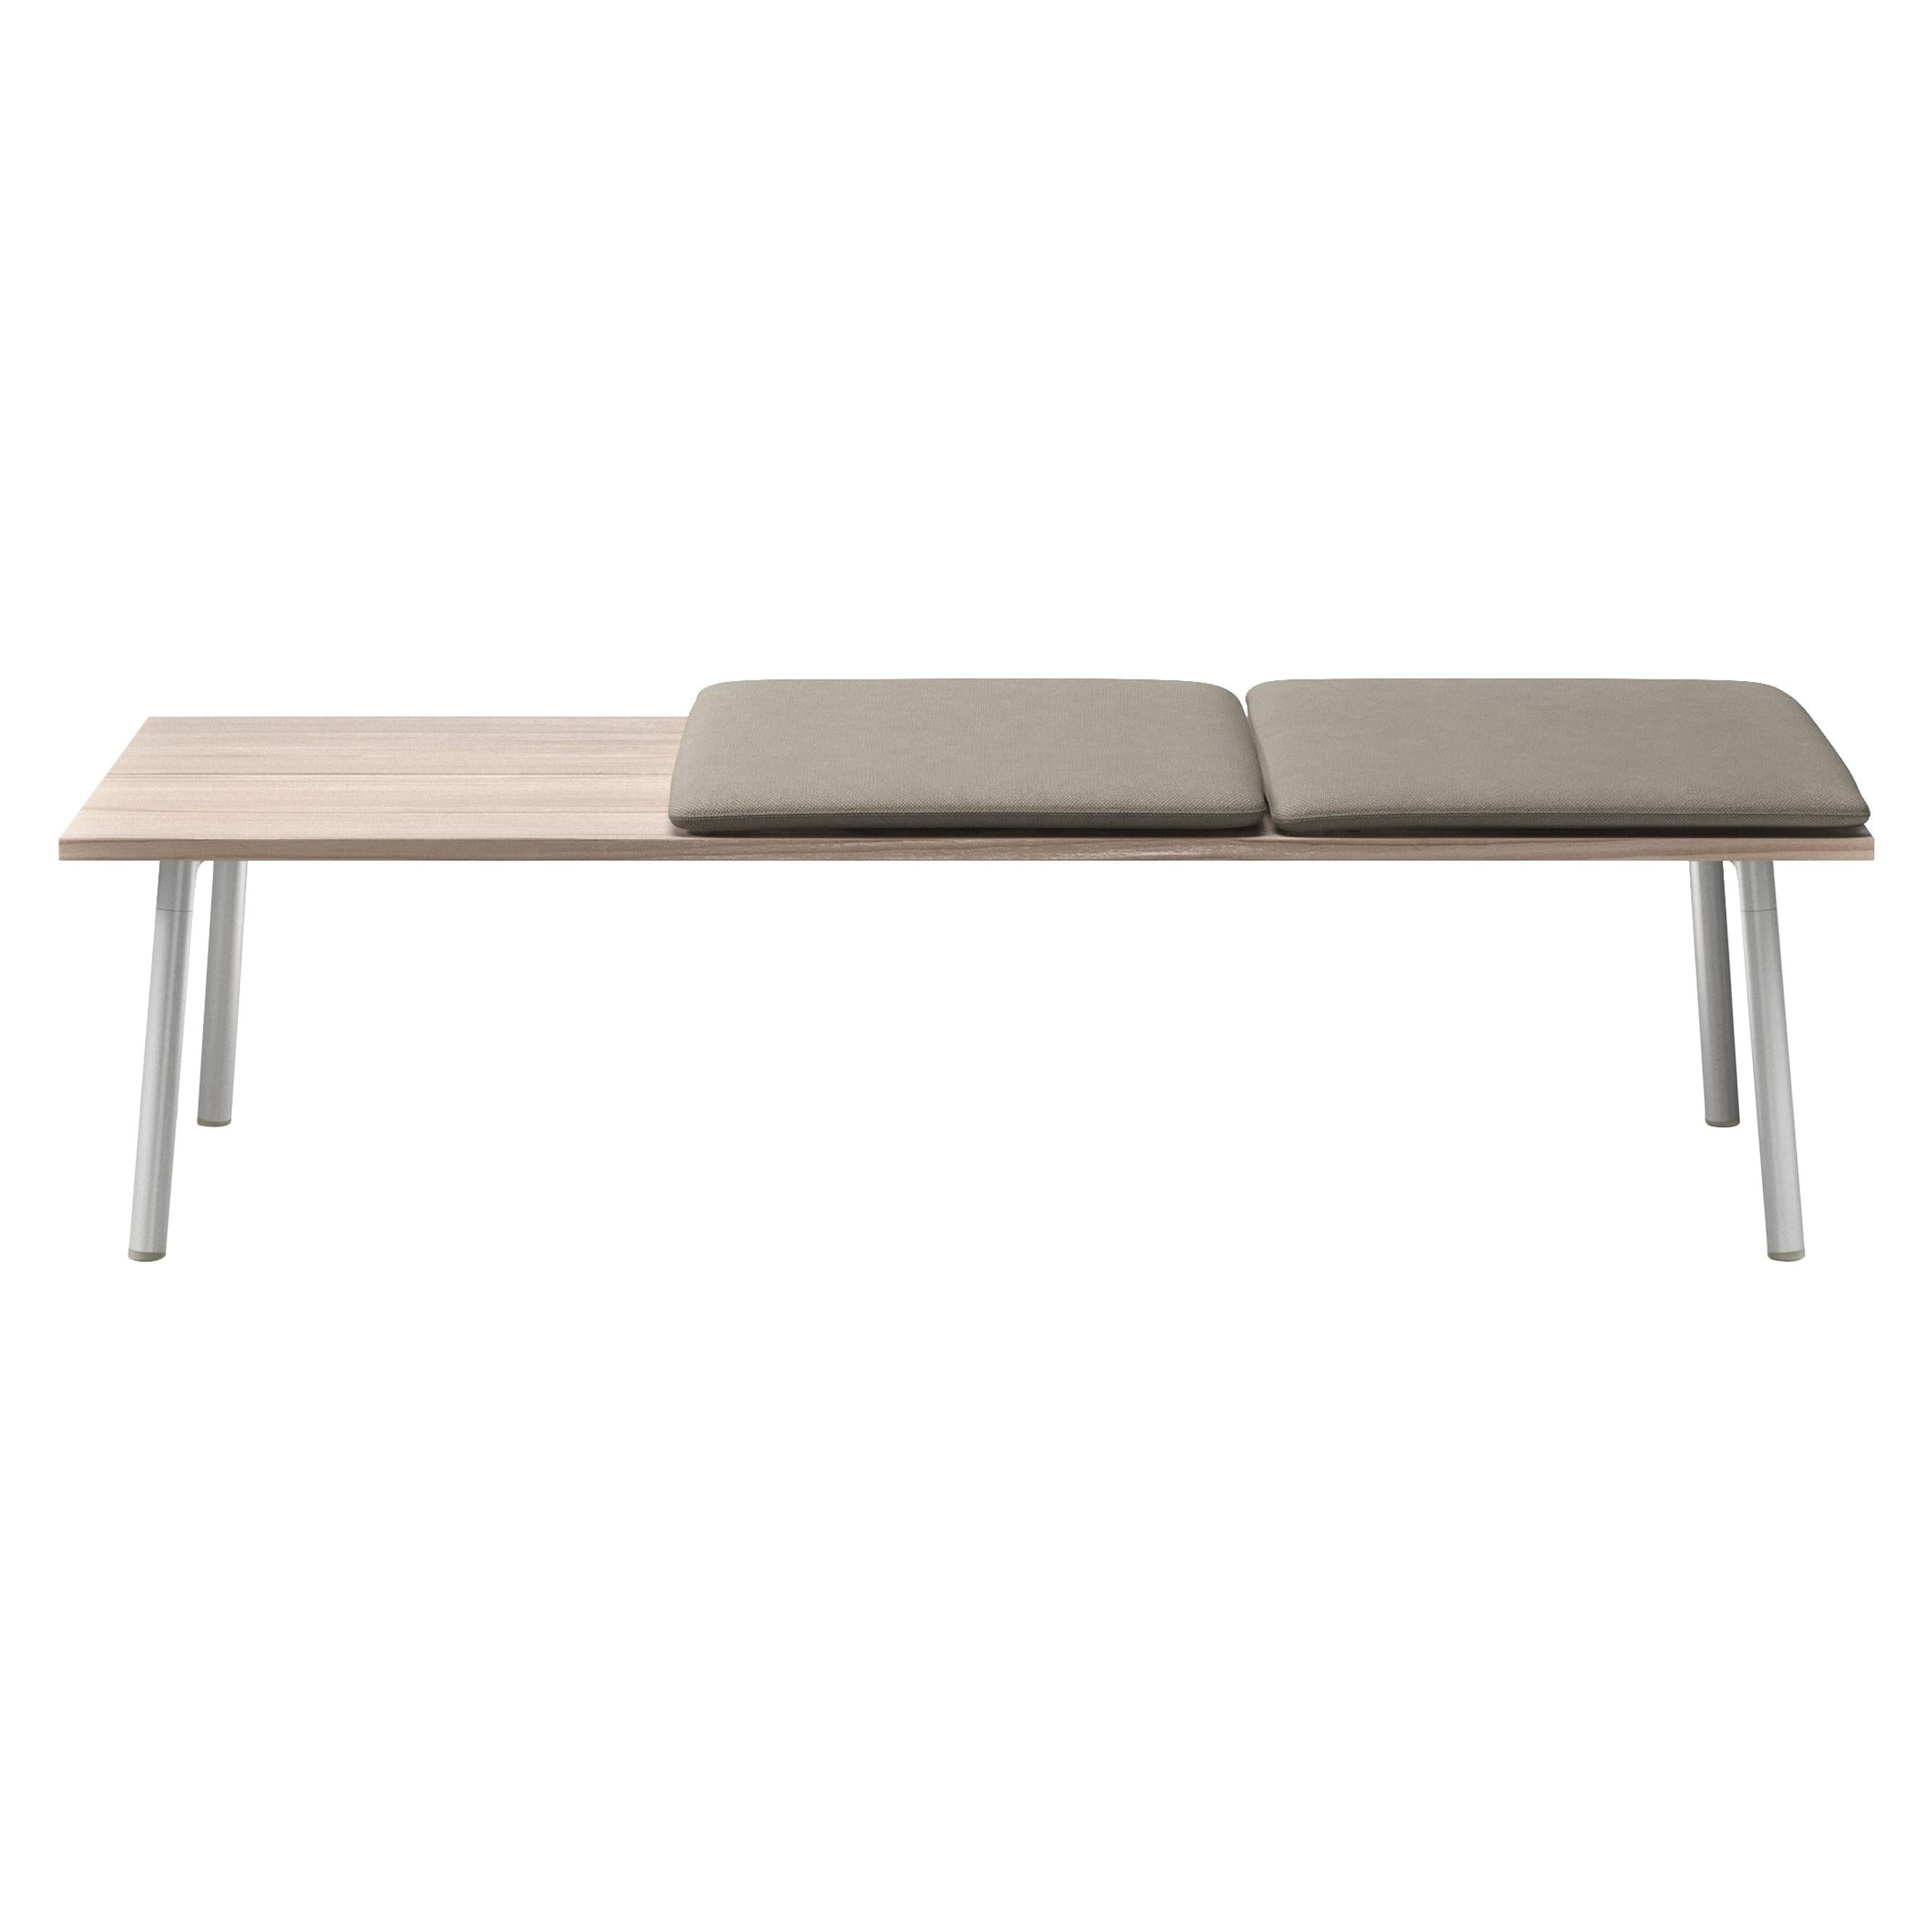 Run Daybed 72" Kvadrat Hallingdal 200 Fabric With Ash Top And Clear Aluminum For Sale